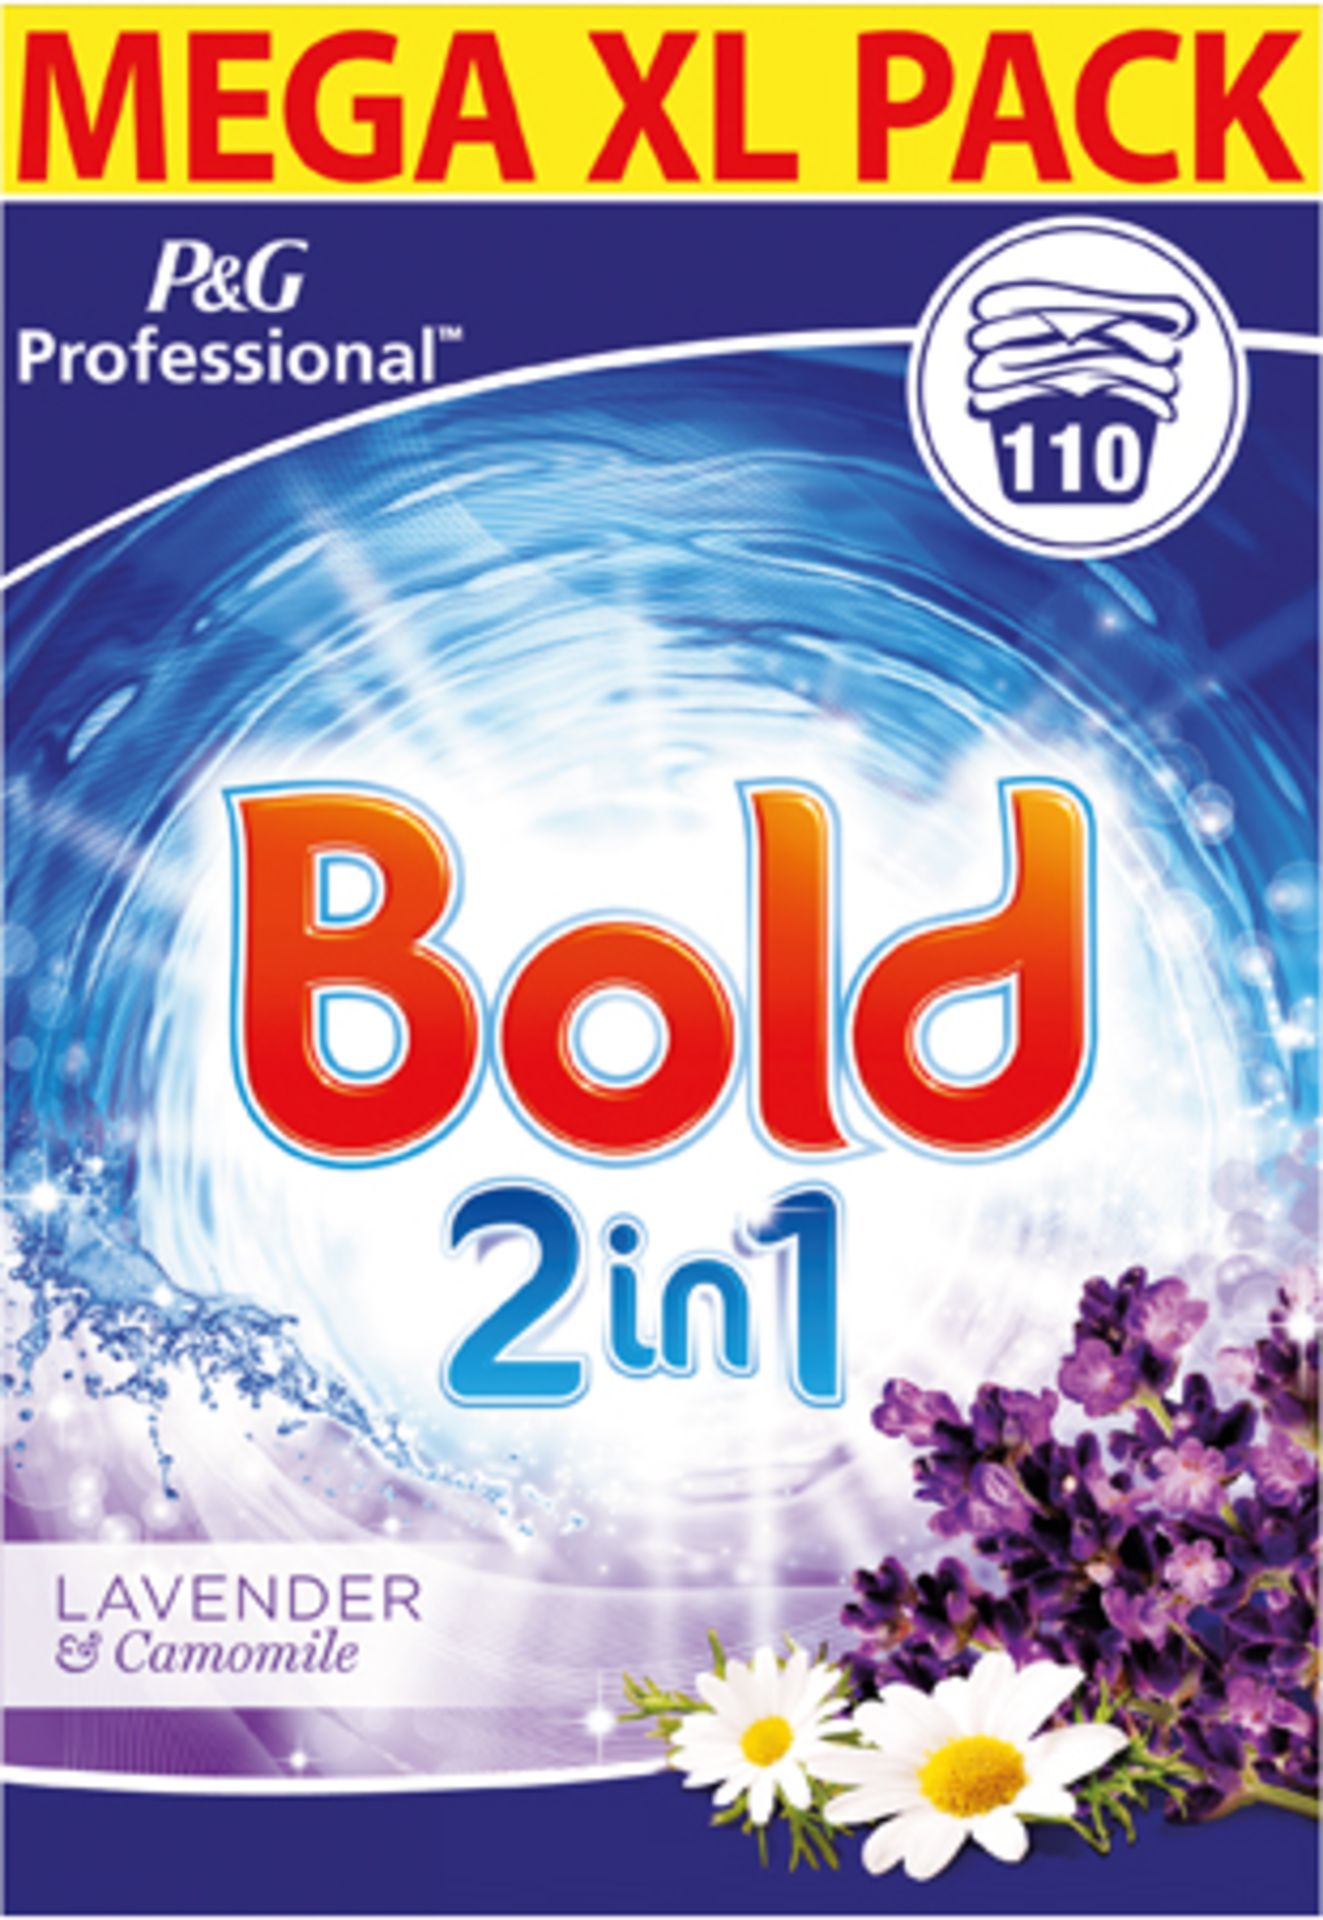 Bold Prof Lav & Cam Powder 110 Wash x 5, Postage available by ParcelForce Express 48 £14.99